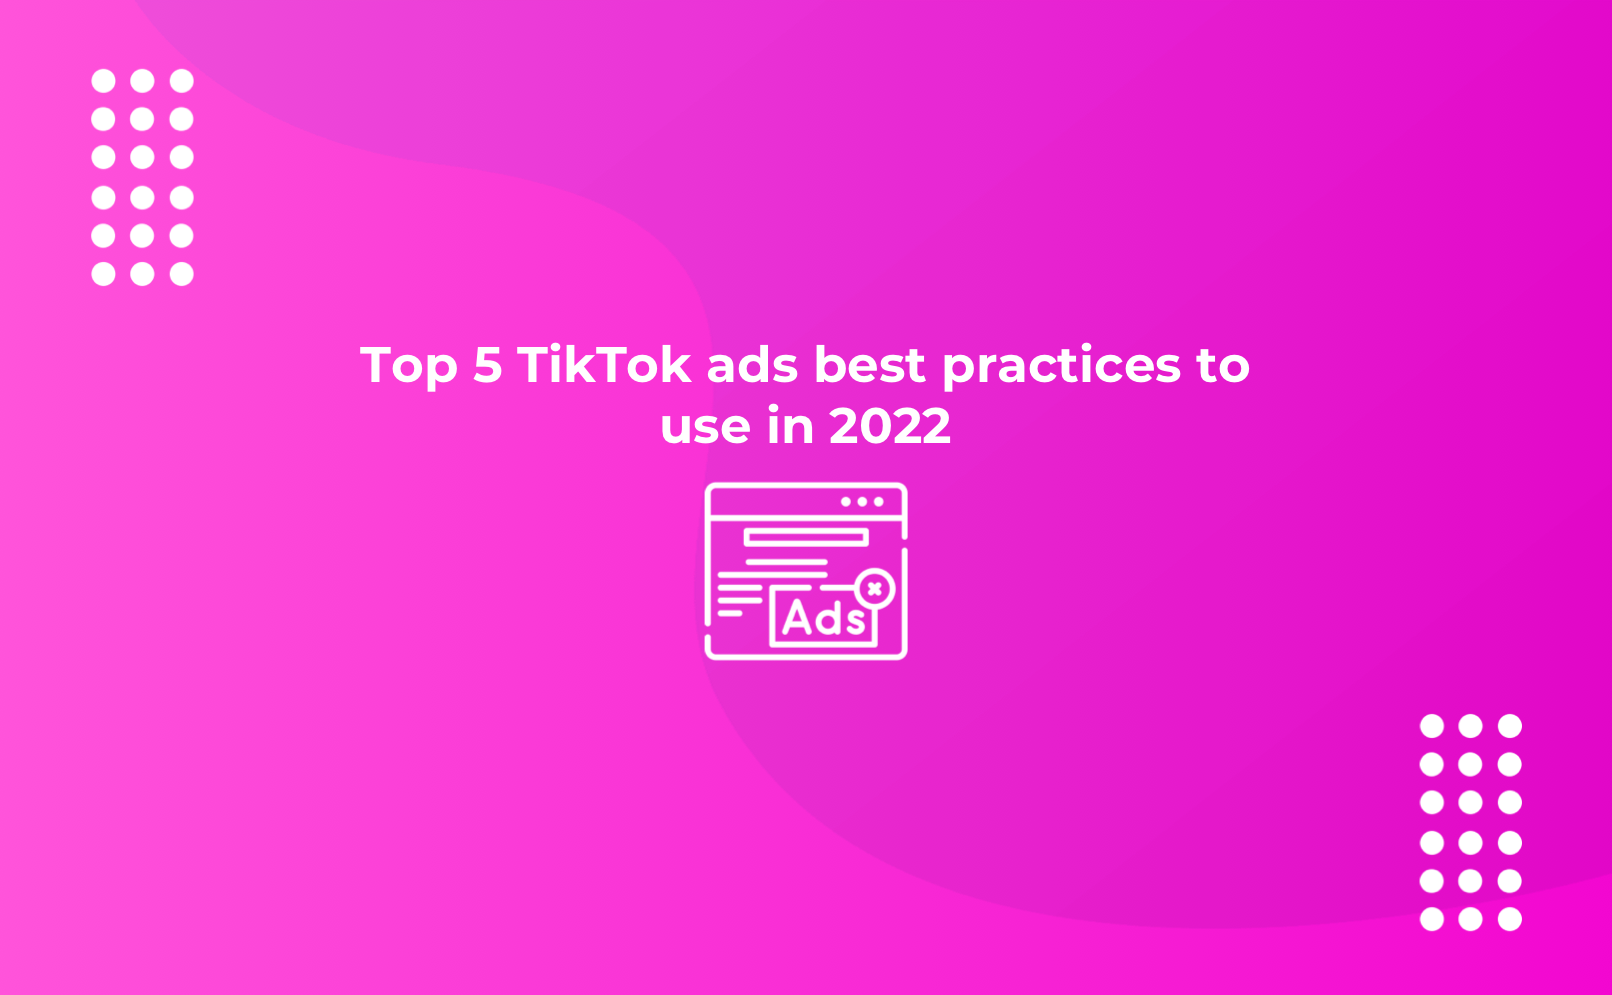 Top 5 TikTok ads best practices to use in 2022